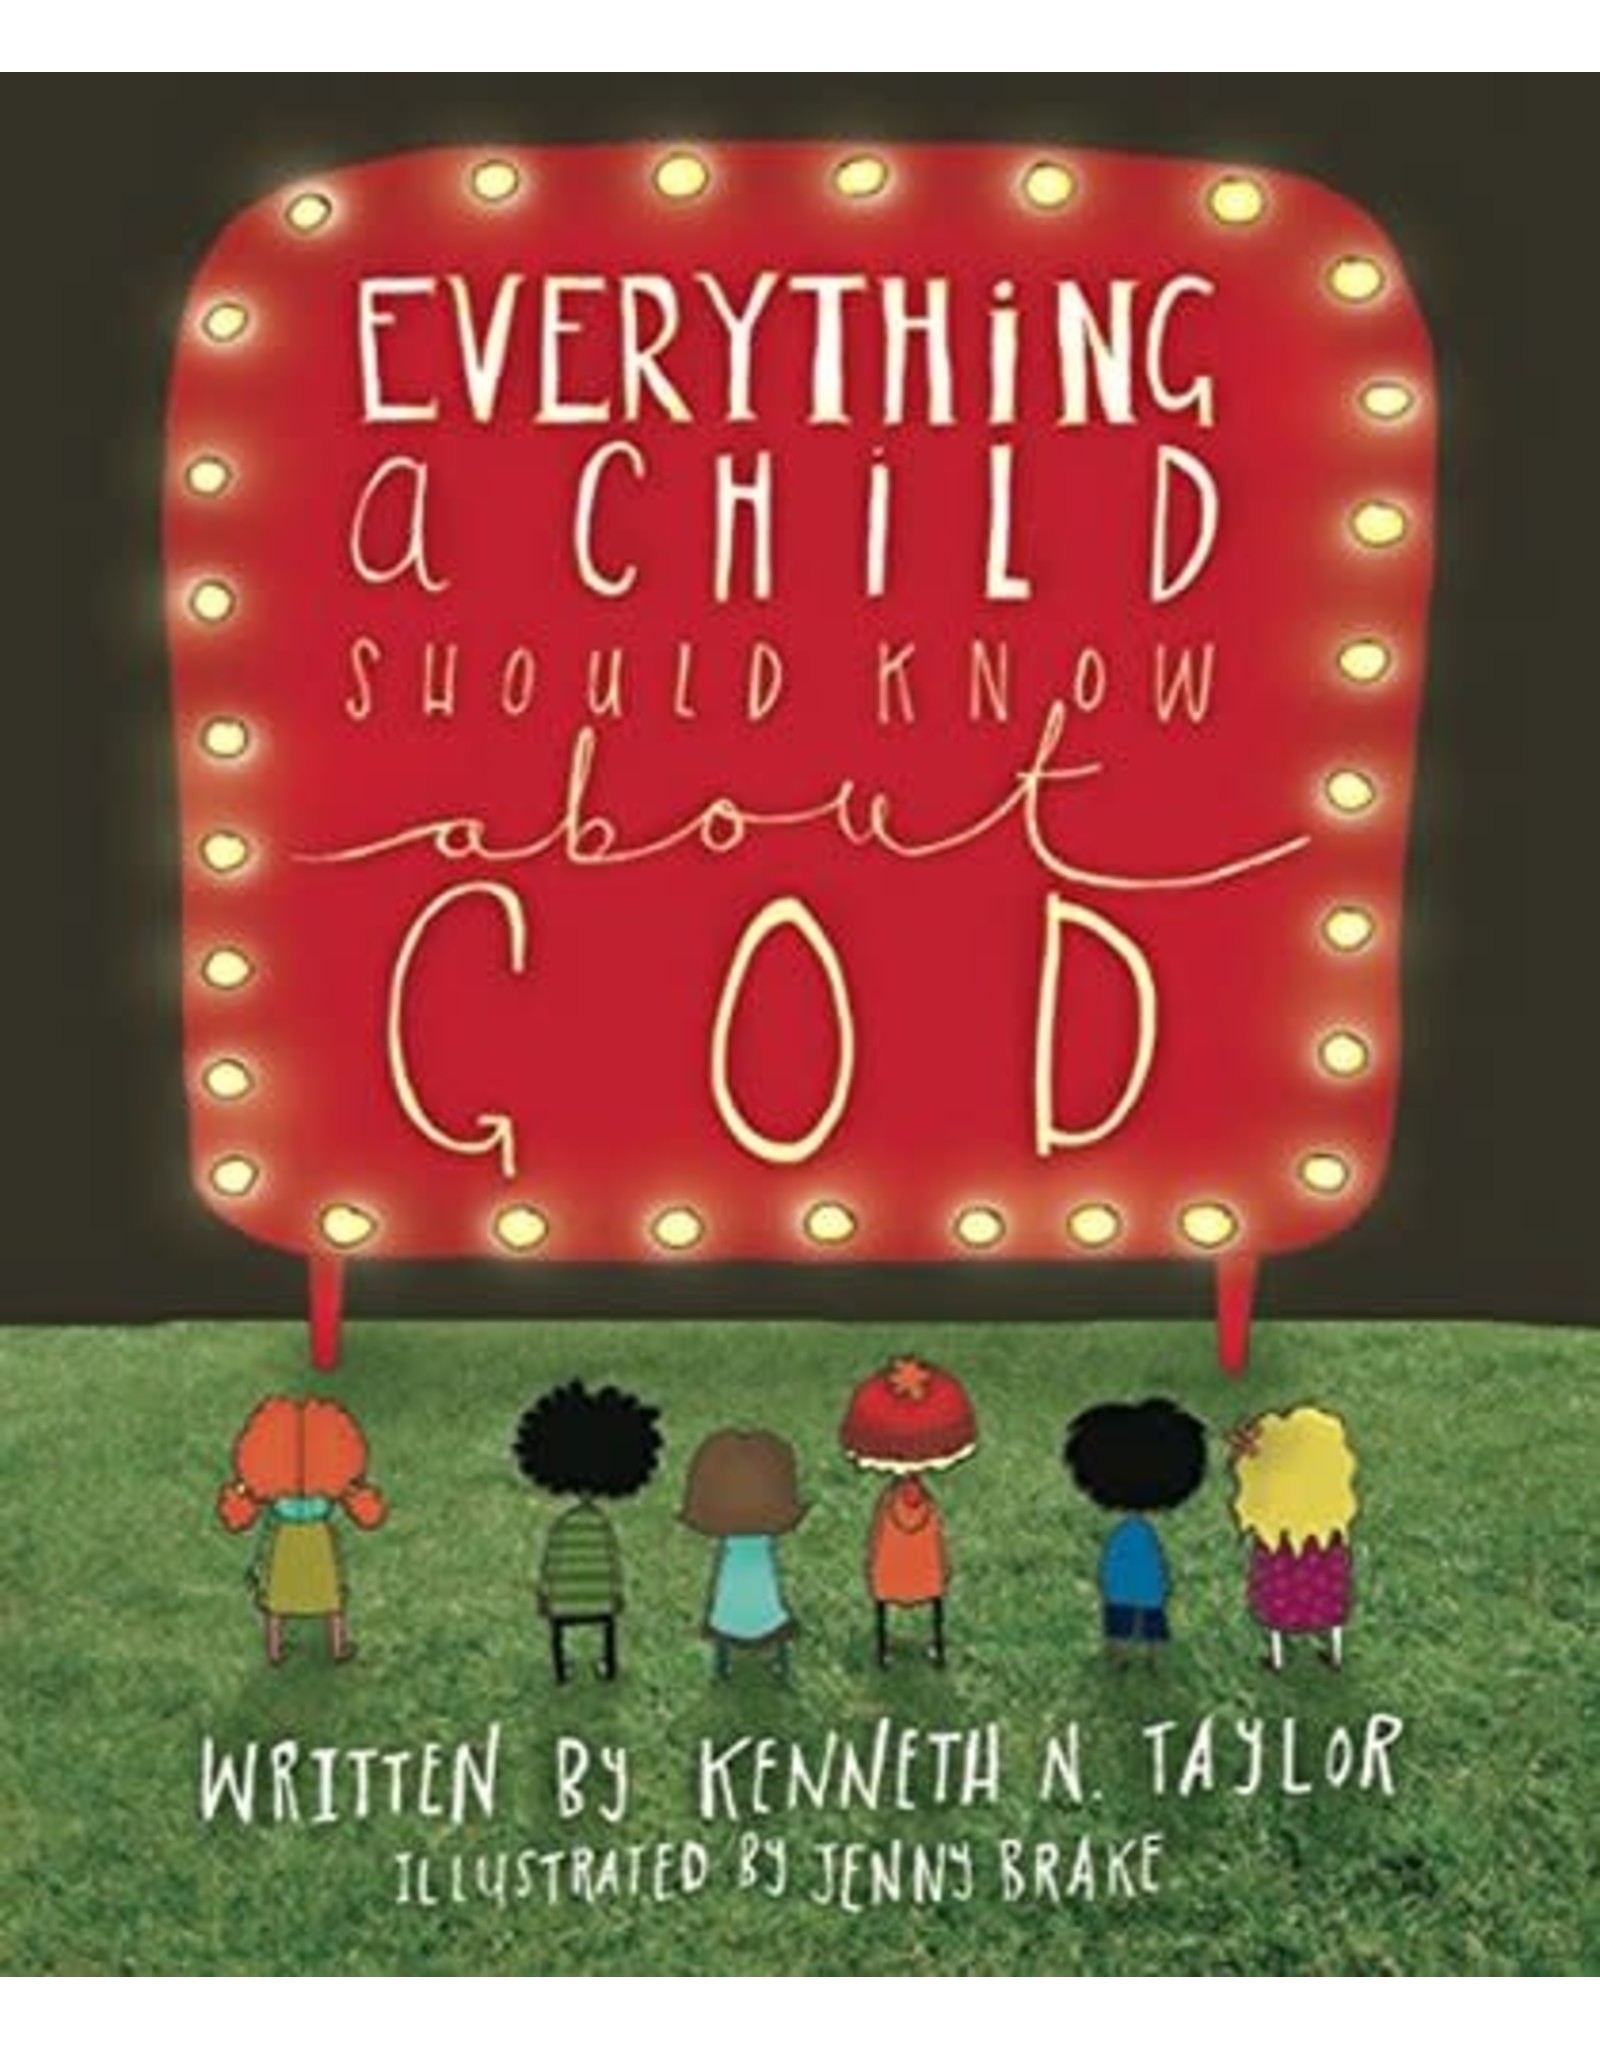 10ofThose / 10 Publishing Everything a Child Should Know About God